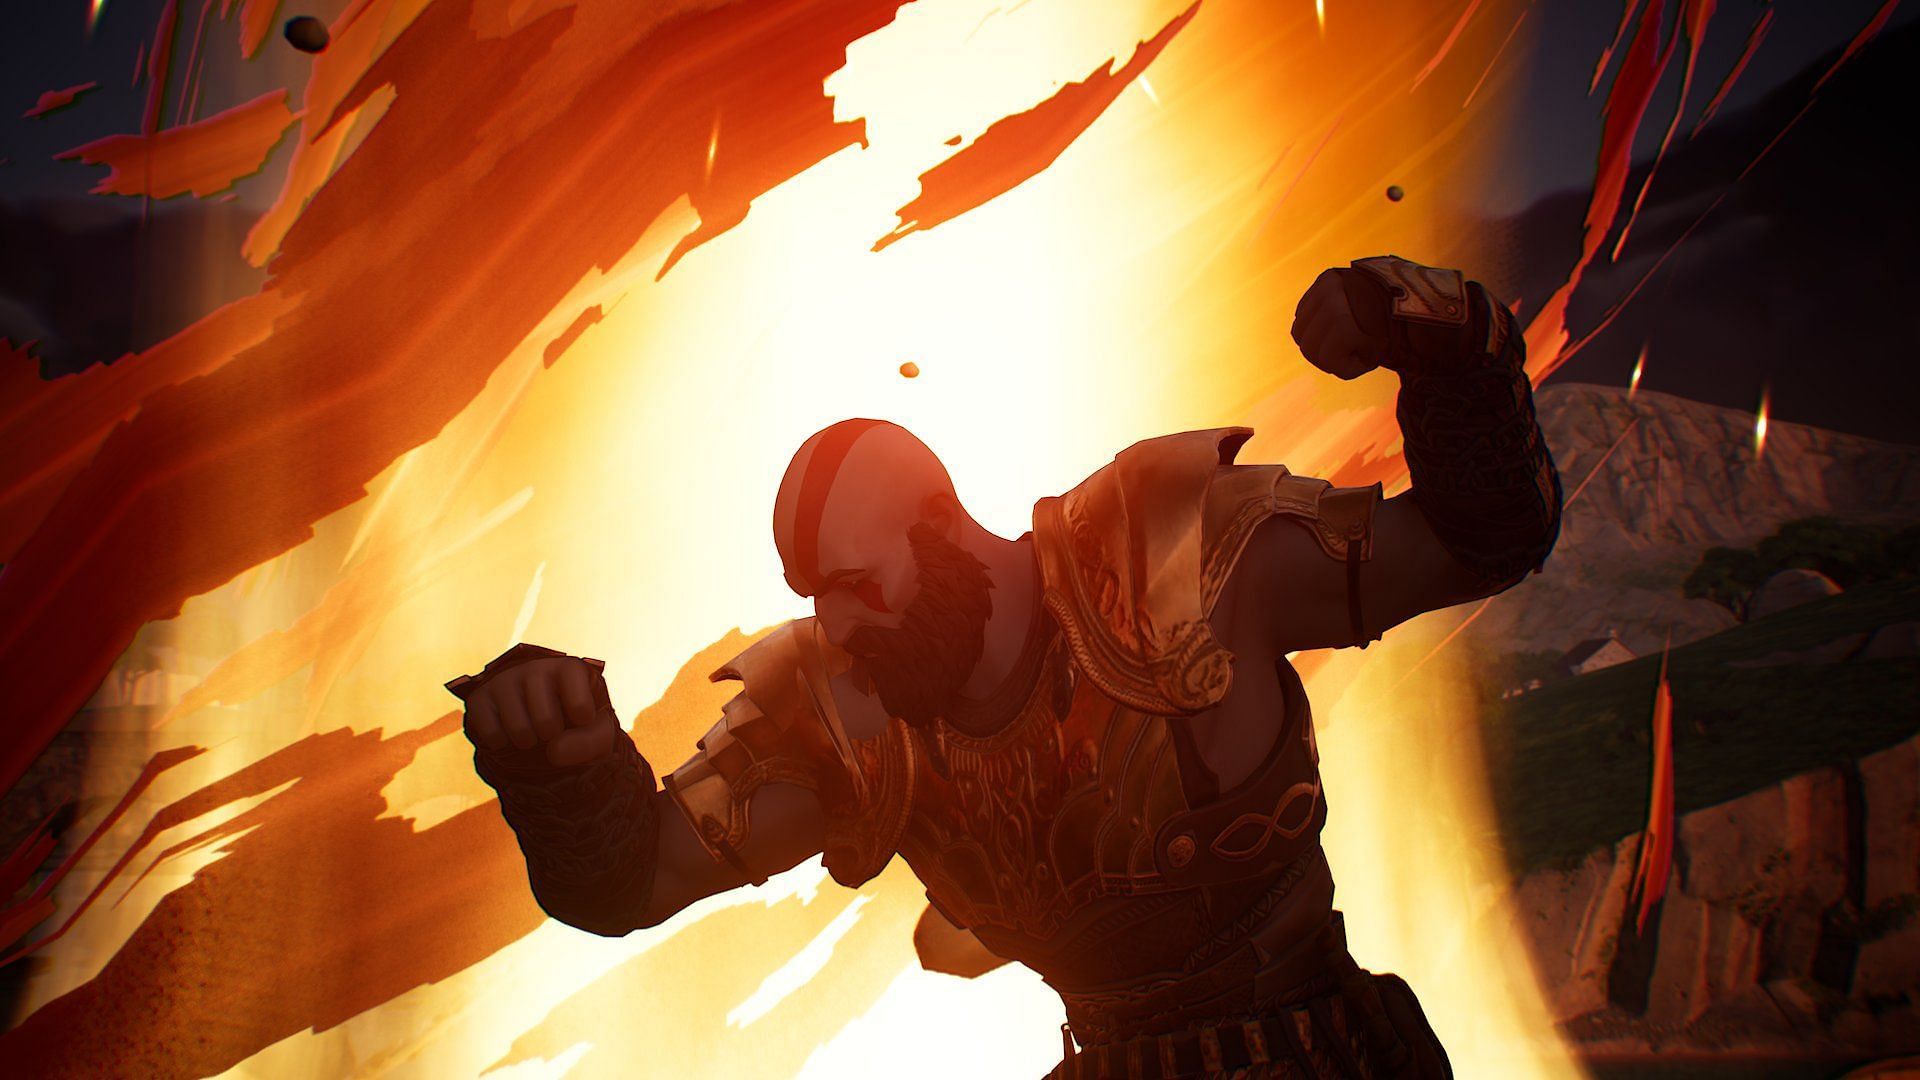 &quot;Let It go:&quot; Fortnite community left disappointed as Kratos skin was not added back to Item Shop